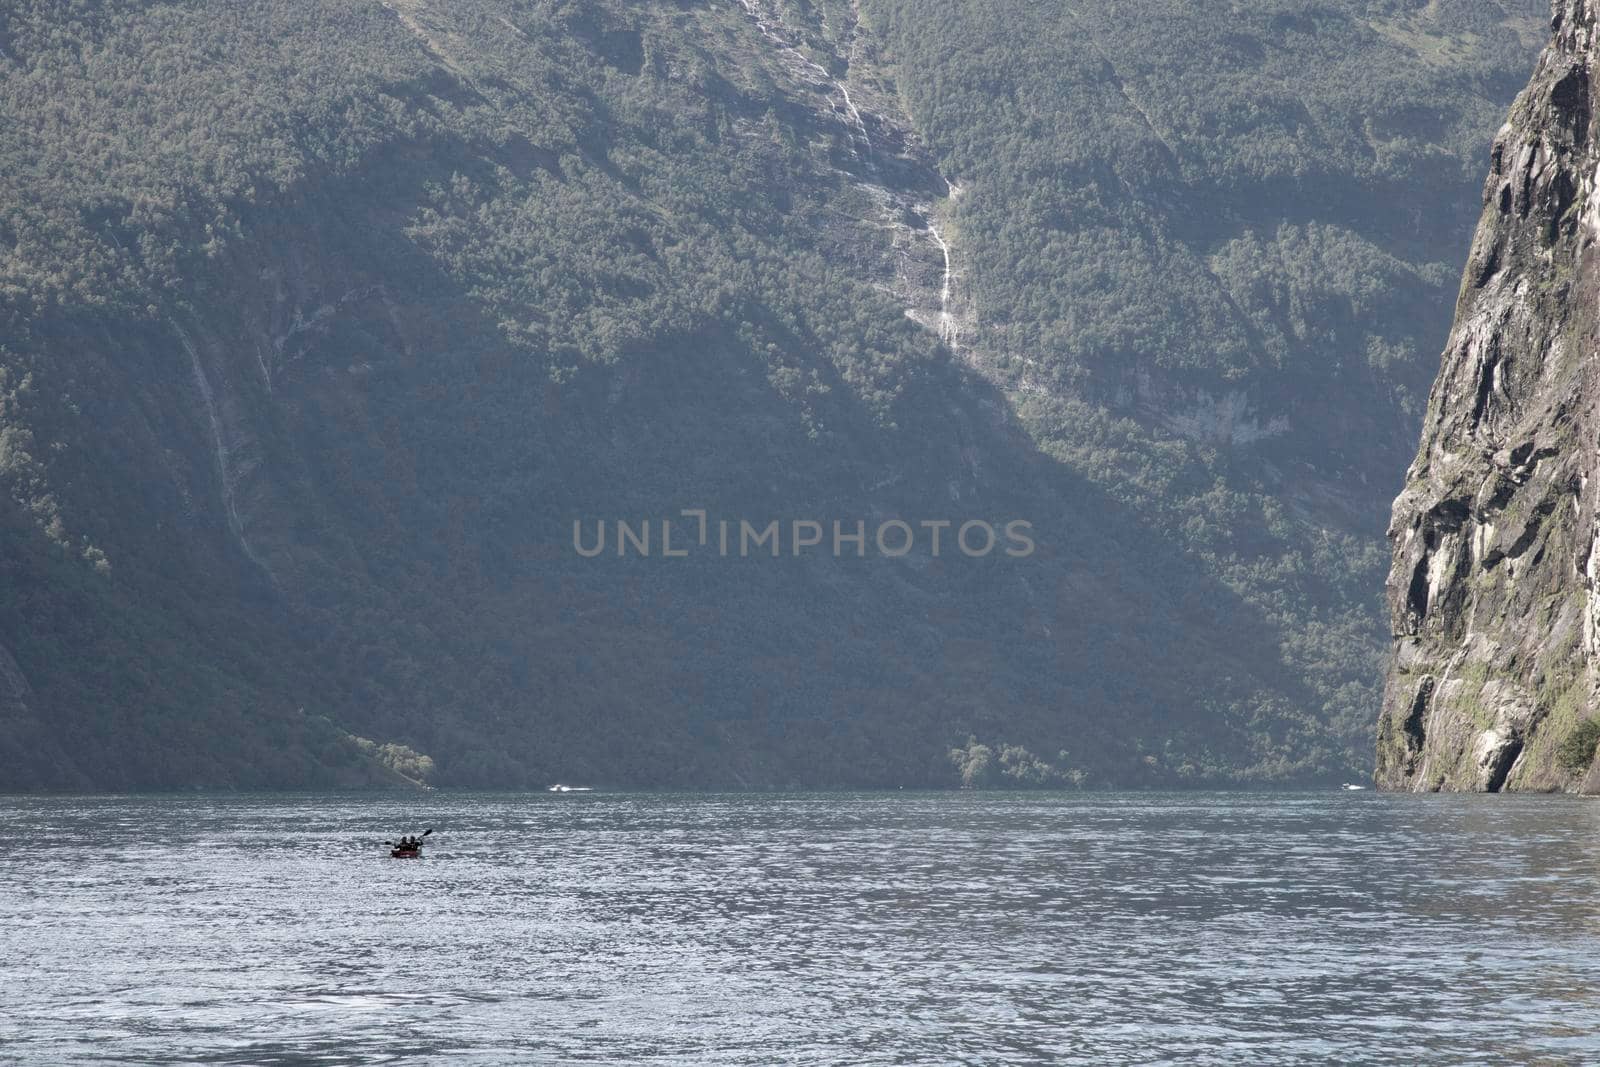 Landscape showing a mountain wall and a canoe on Geiranger fjord in Norway